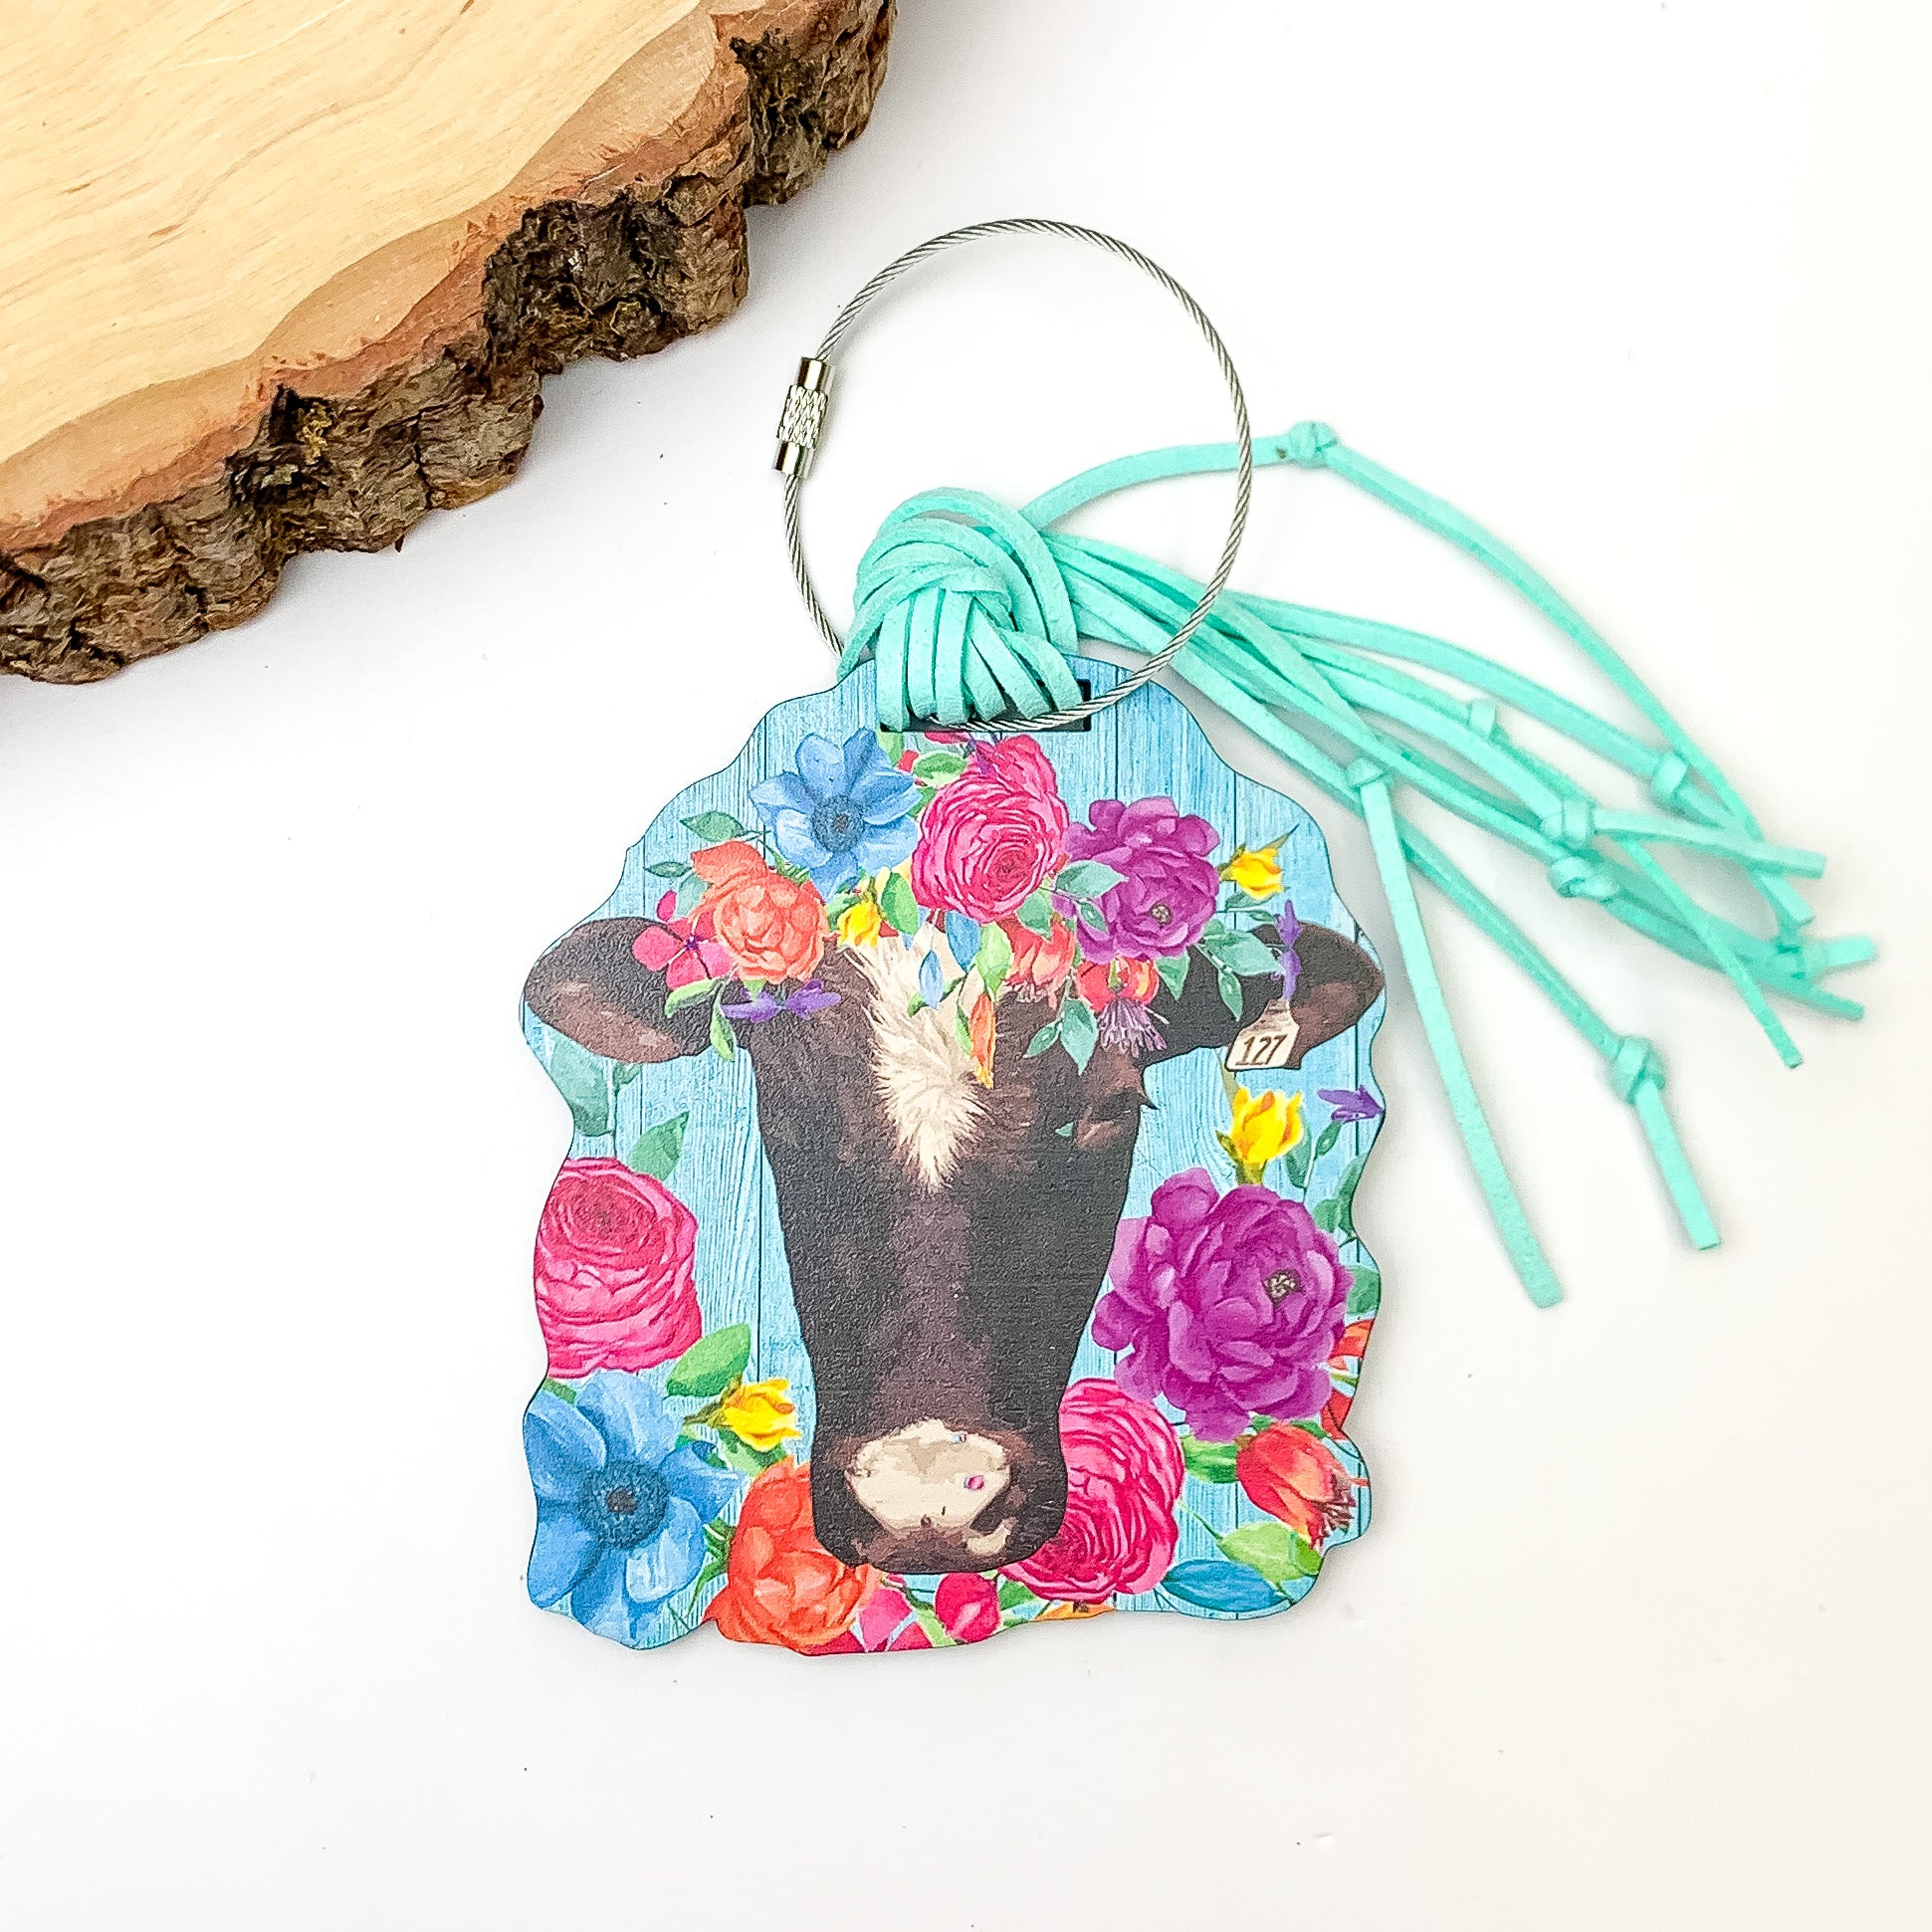 Cow Head Luggage Tag With Flower Crown in Multicolor. Pictured on a white background with a wood piece in the top left corner.